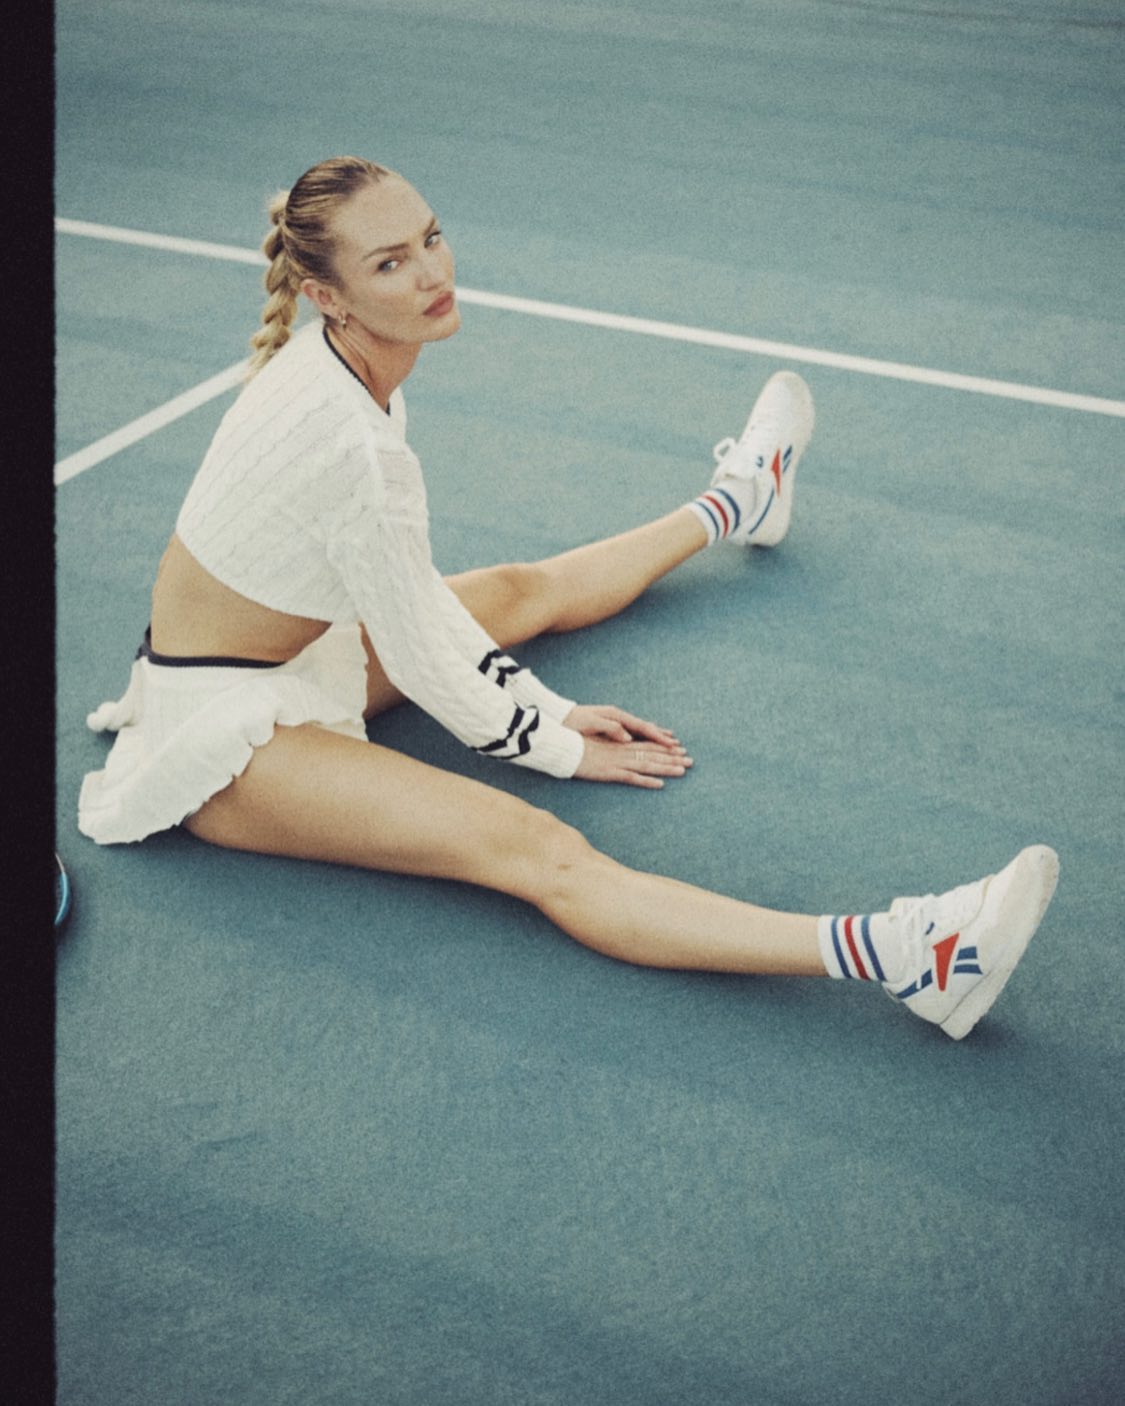 Candice Swanepoel frappe les courts avec Tropic of C! - Photo 10